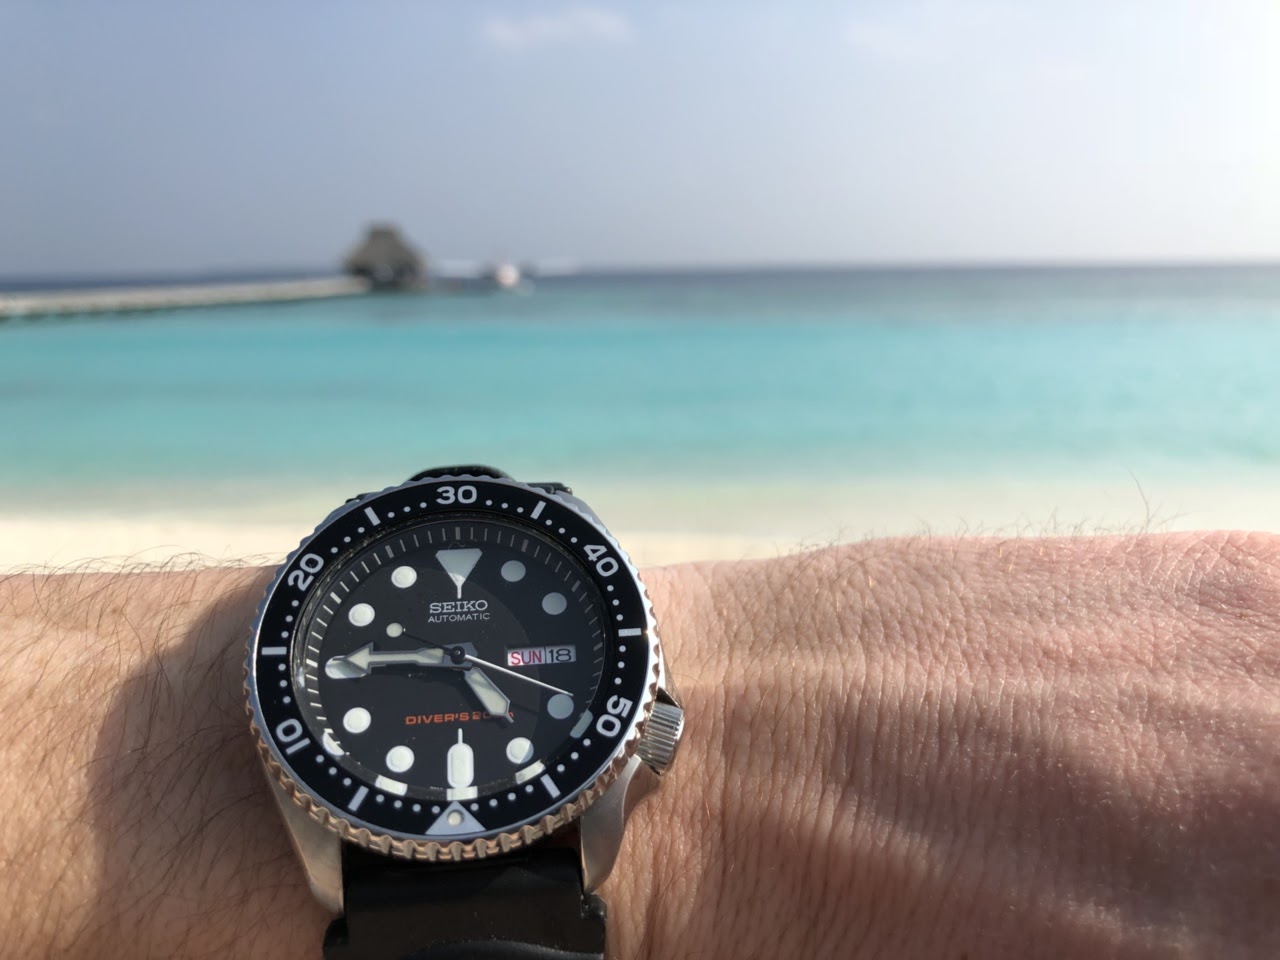 Seiko - Taking the icon for a spin.